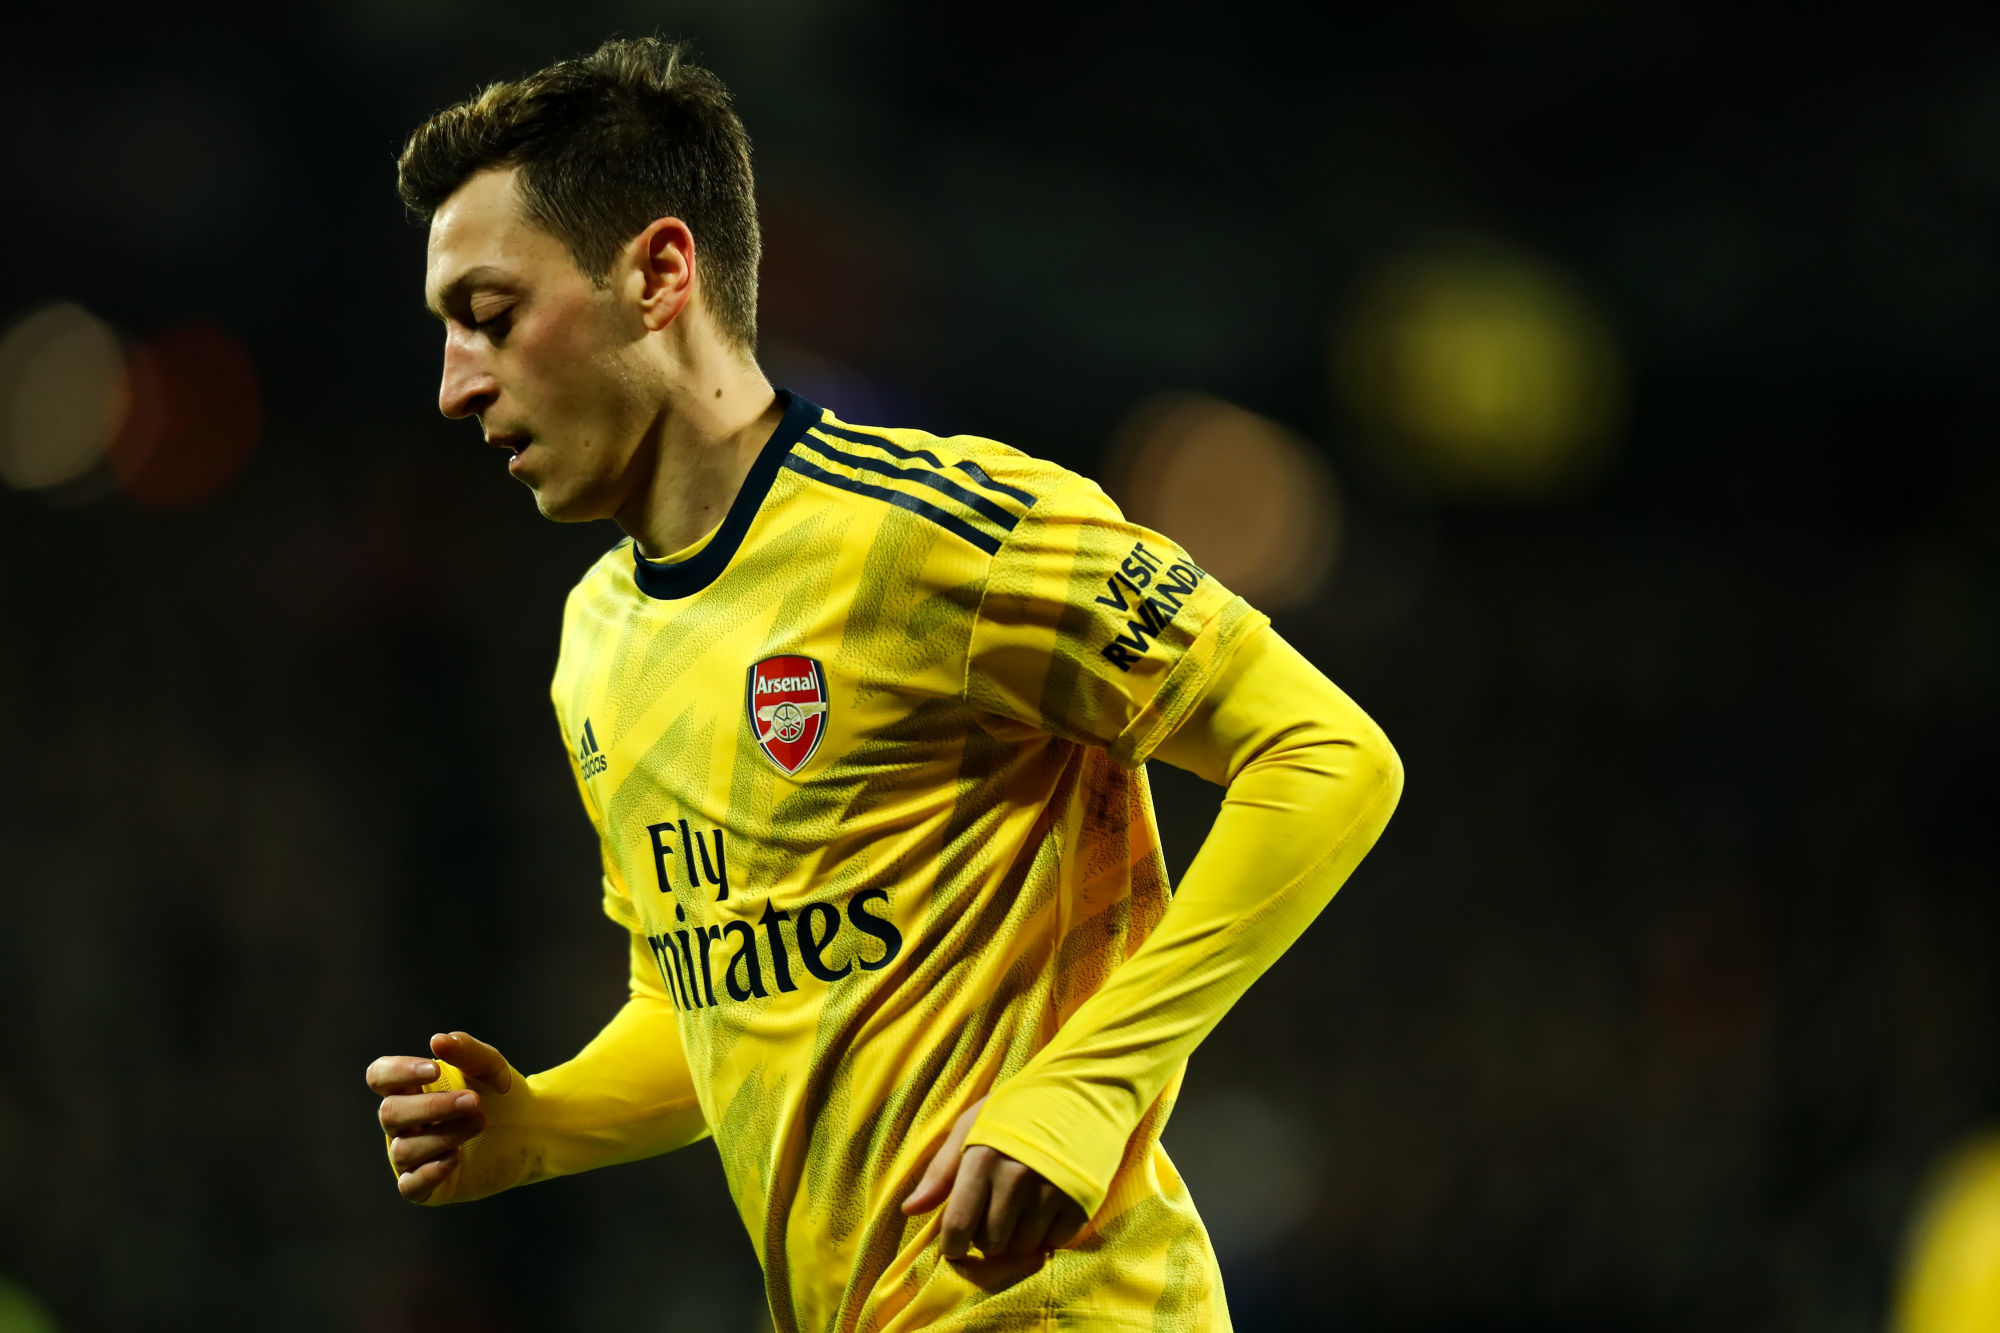 9th December 2019; London Stadium, London, England; English Premier League Football, West Ham United versus Arsenal; Mesut Ozil of Arsenal - Strictly Editorial Use Only. No use with unauthorized audio, video, data, fixture lists, club/league logos or 'live' services. Online in-match use limited to 120 images, no video emulation. No use in betting, games or single club/league/player publications 


Photo by Icon Sport - Mesut OZIL - London Stadium - Londres (Angleterre)